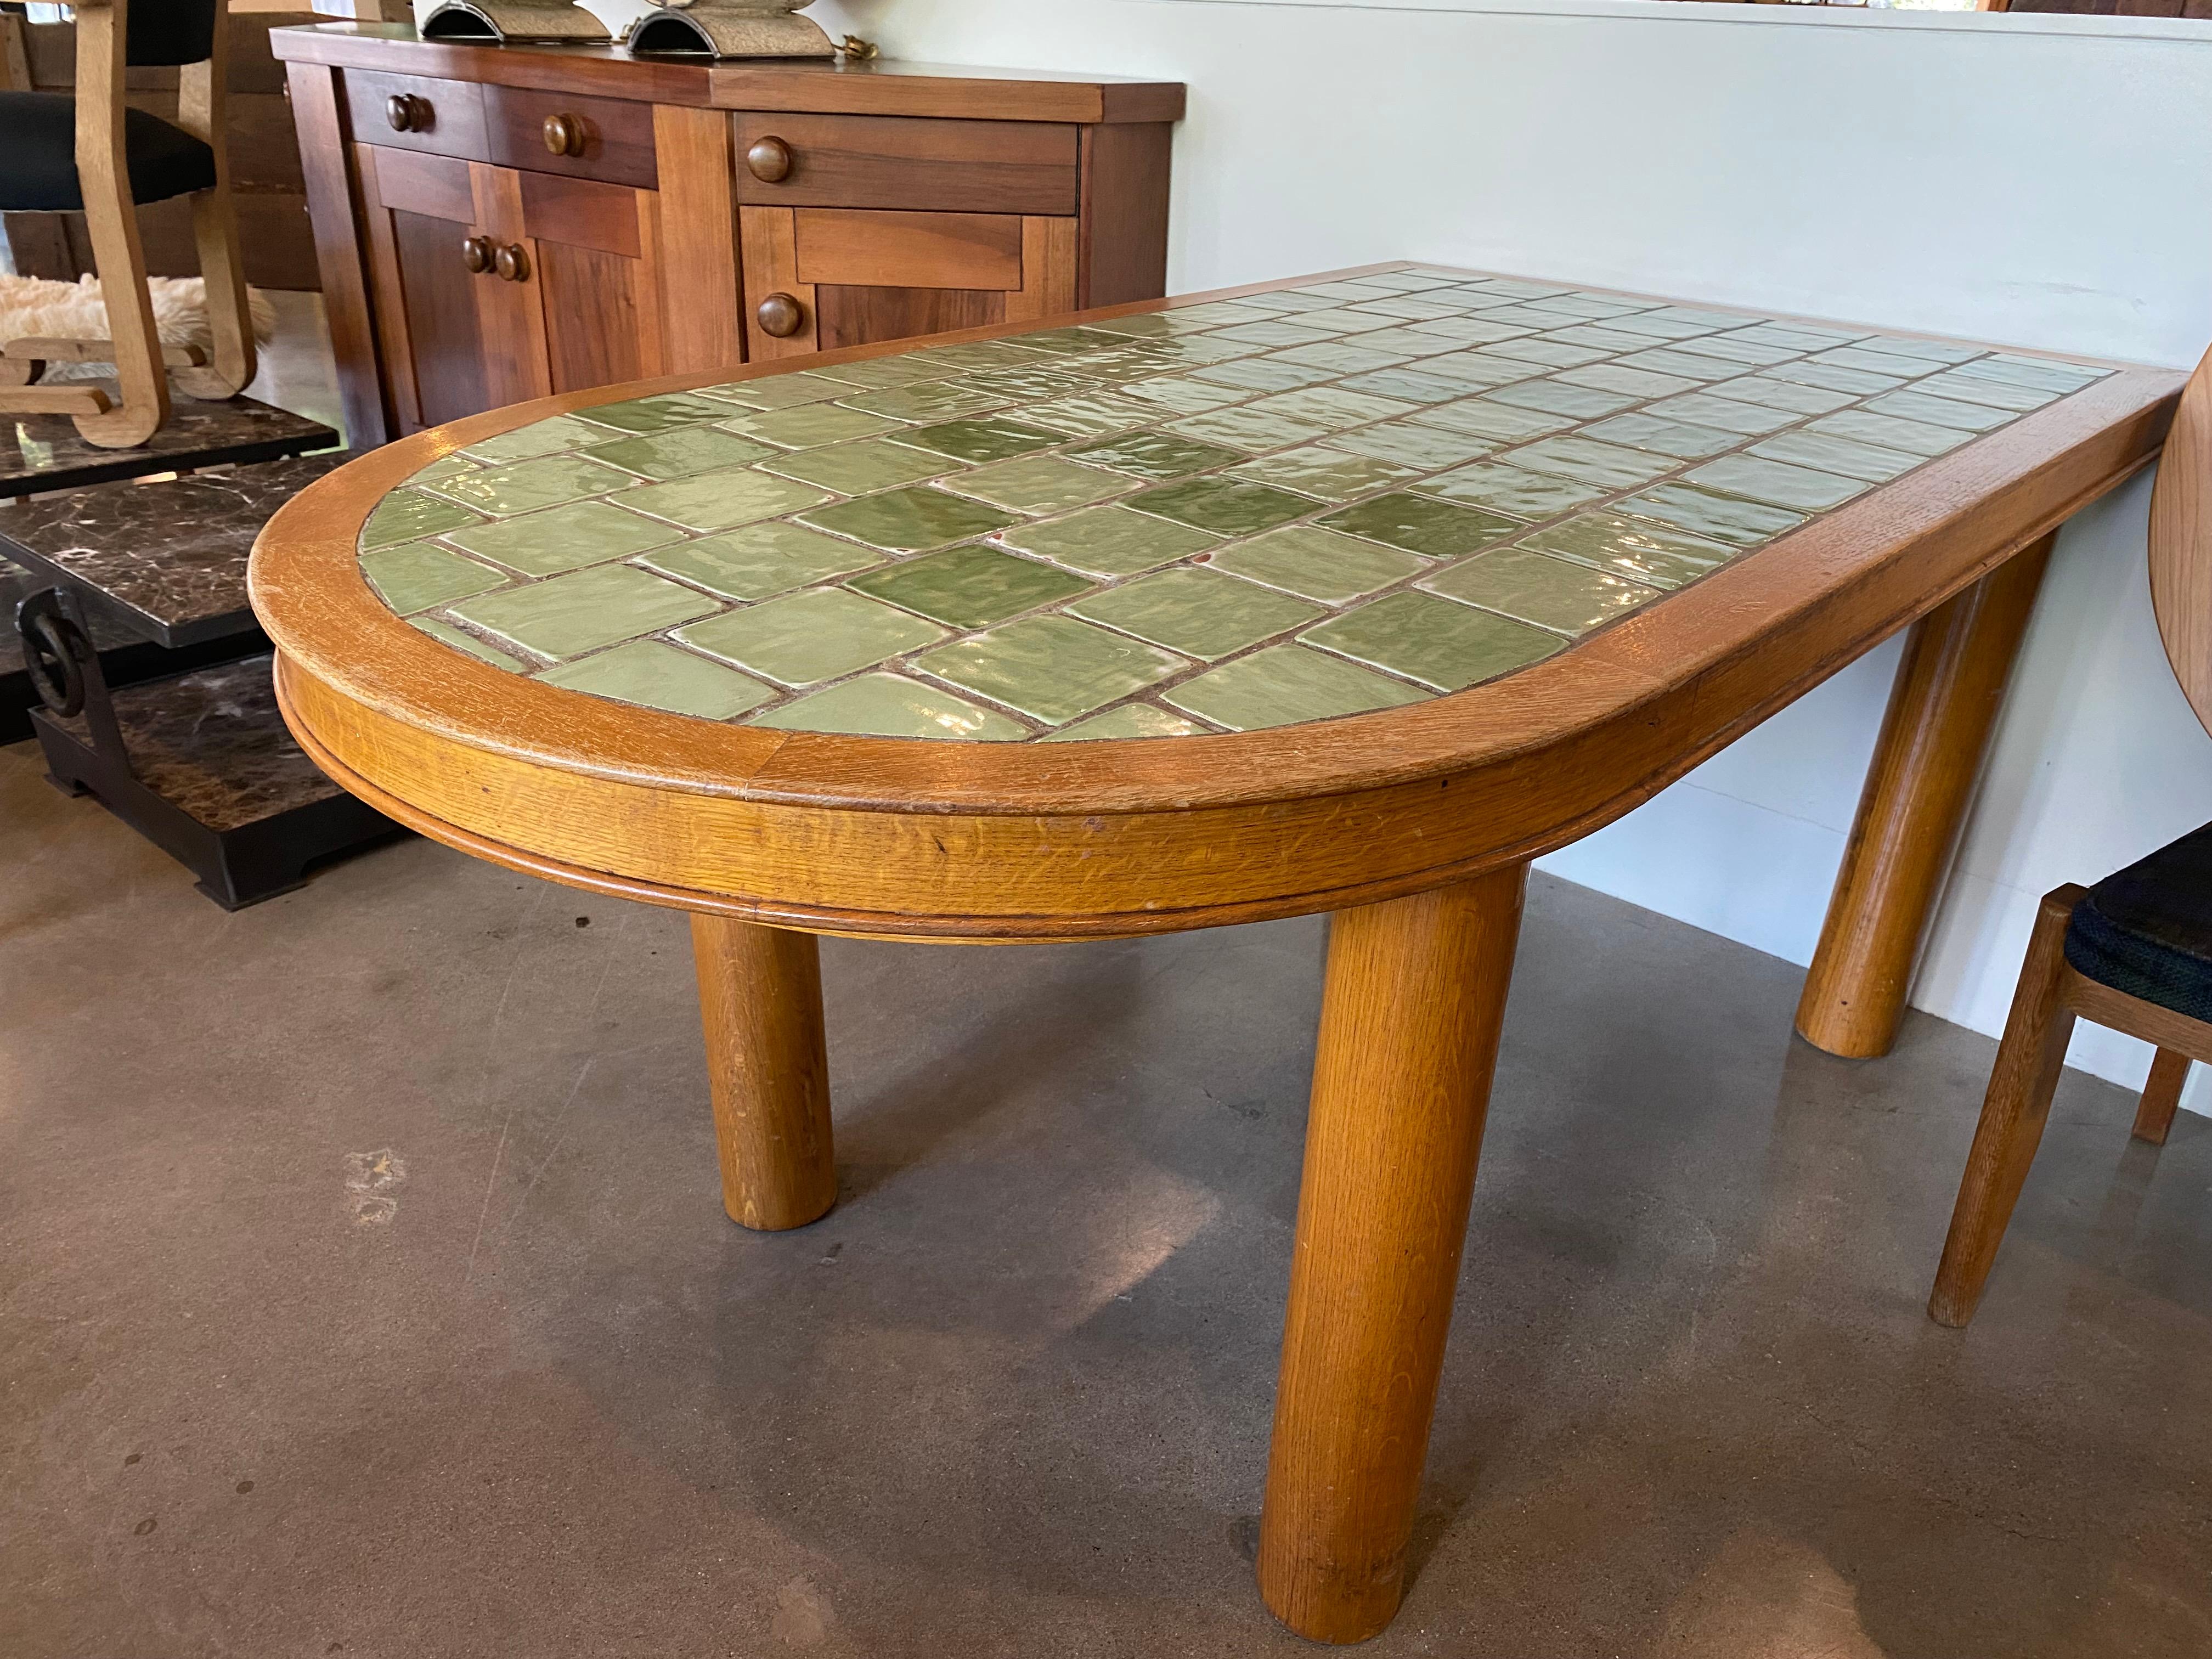 Mid-Century Modern Oak and Green Ceramic Tile Dining Table, France, 1940-50's